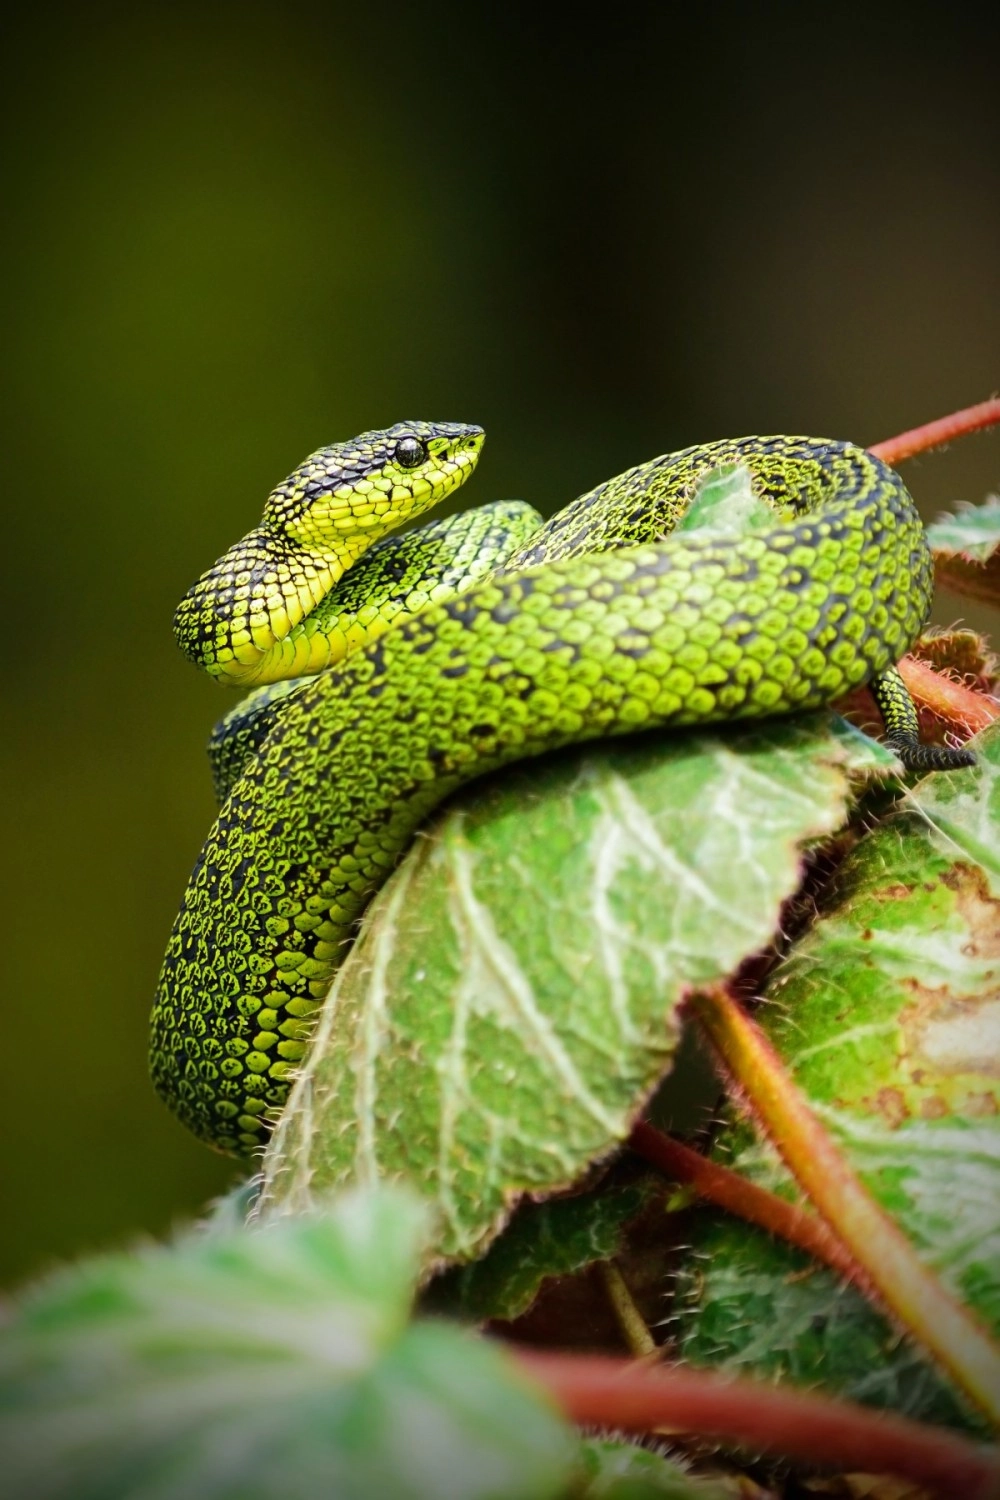 A green snake coiling a leaf